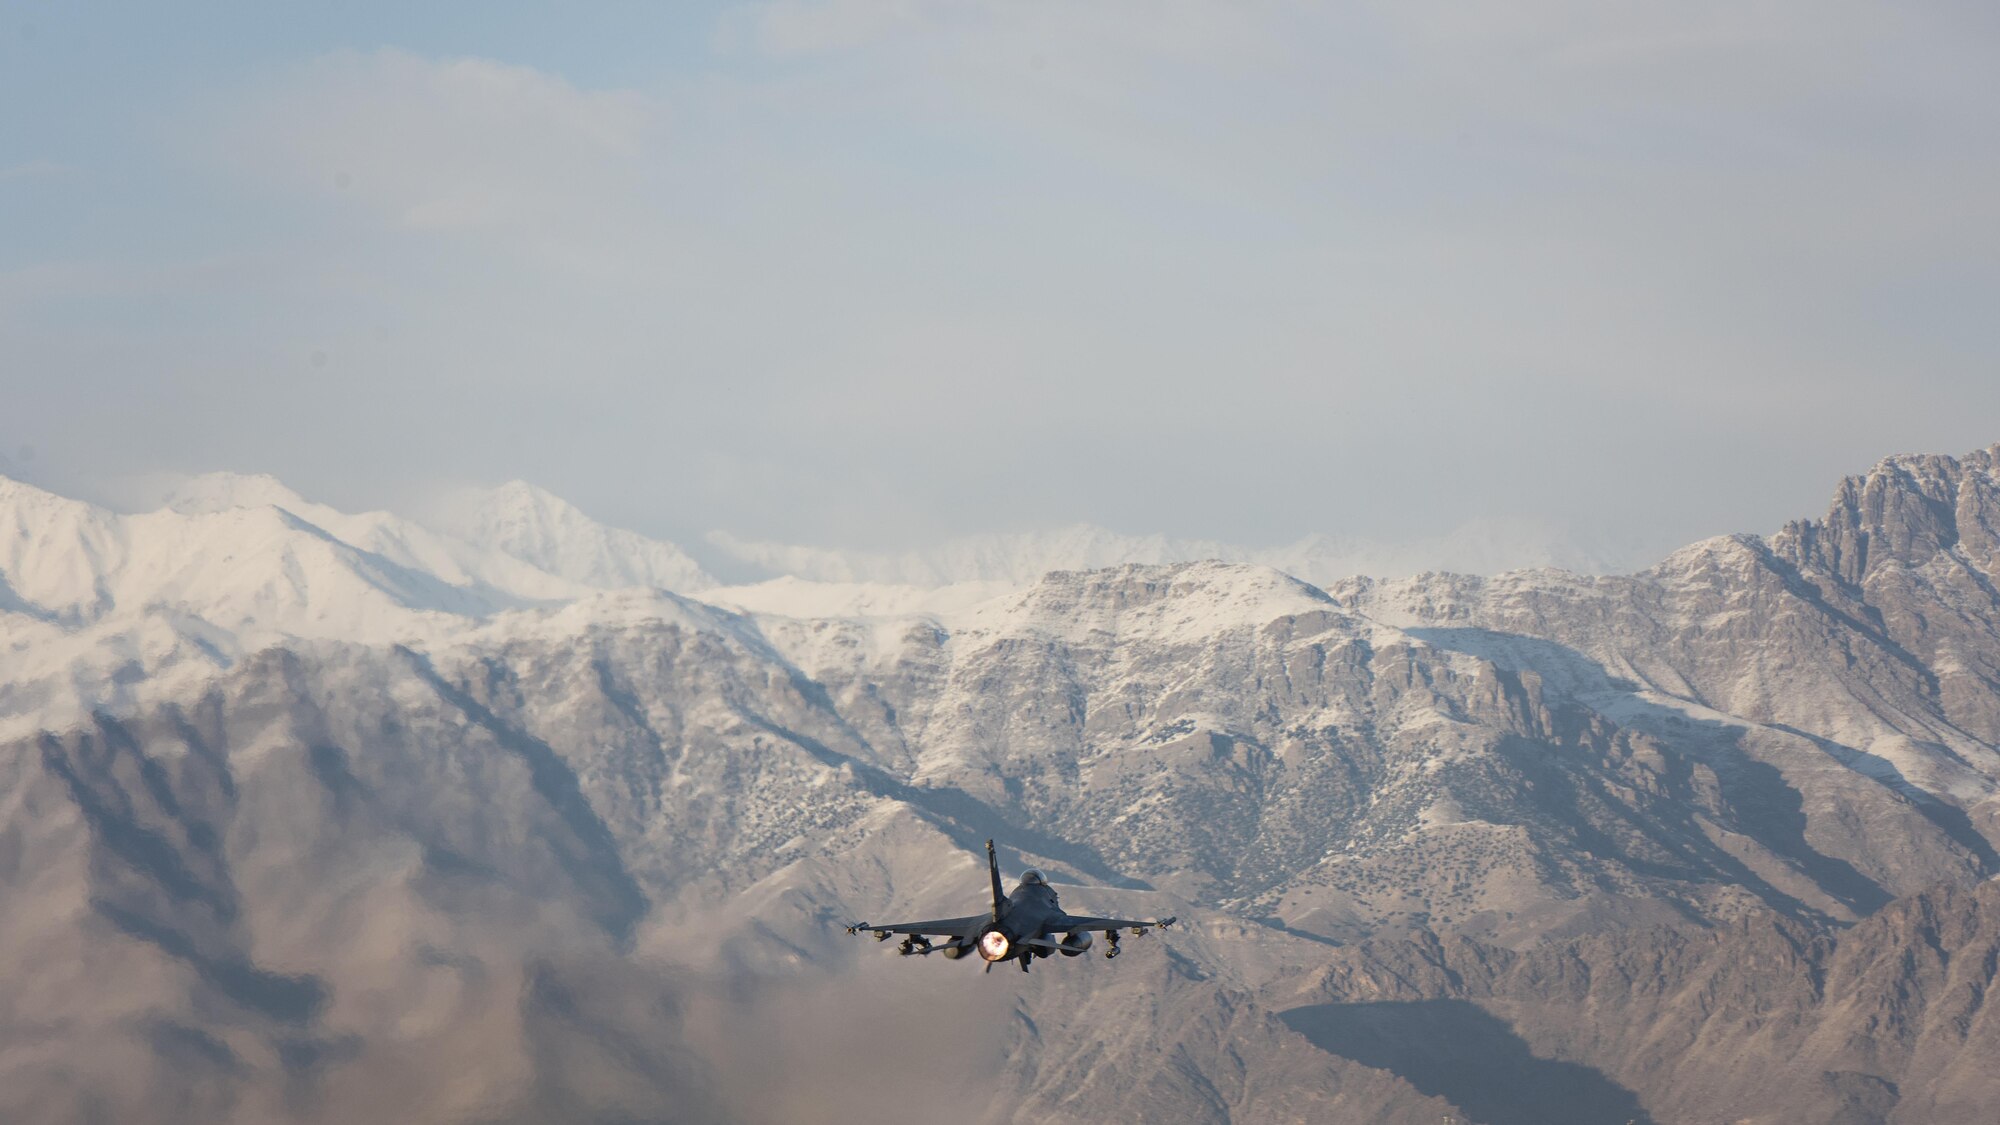 An F-16 Fighting Falcon belonging to the 79th Expeditionary Fighter Squadron out of Shaw Air Force Base, South Carolina, launches on a mission at Bagram Airfield, Afghanistan, Jan. 6, 2017. The 79th EFS at Bagram provides counterterrorism to enable a successful train, advise, assist campaign. (U.S. Air Force photo by Staff Sgt. Katherine Spessa)